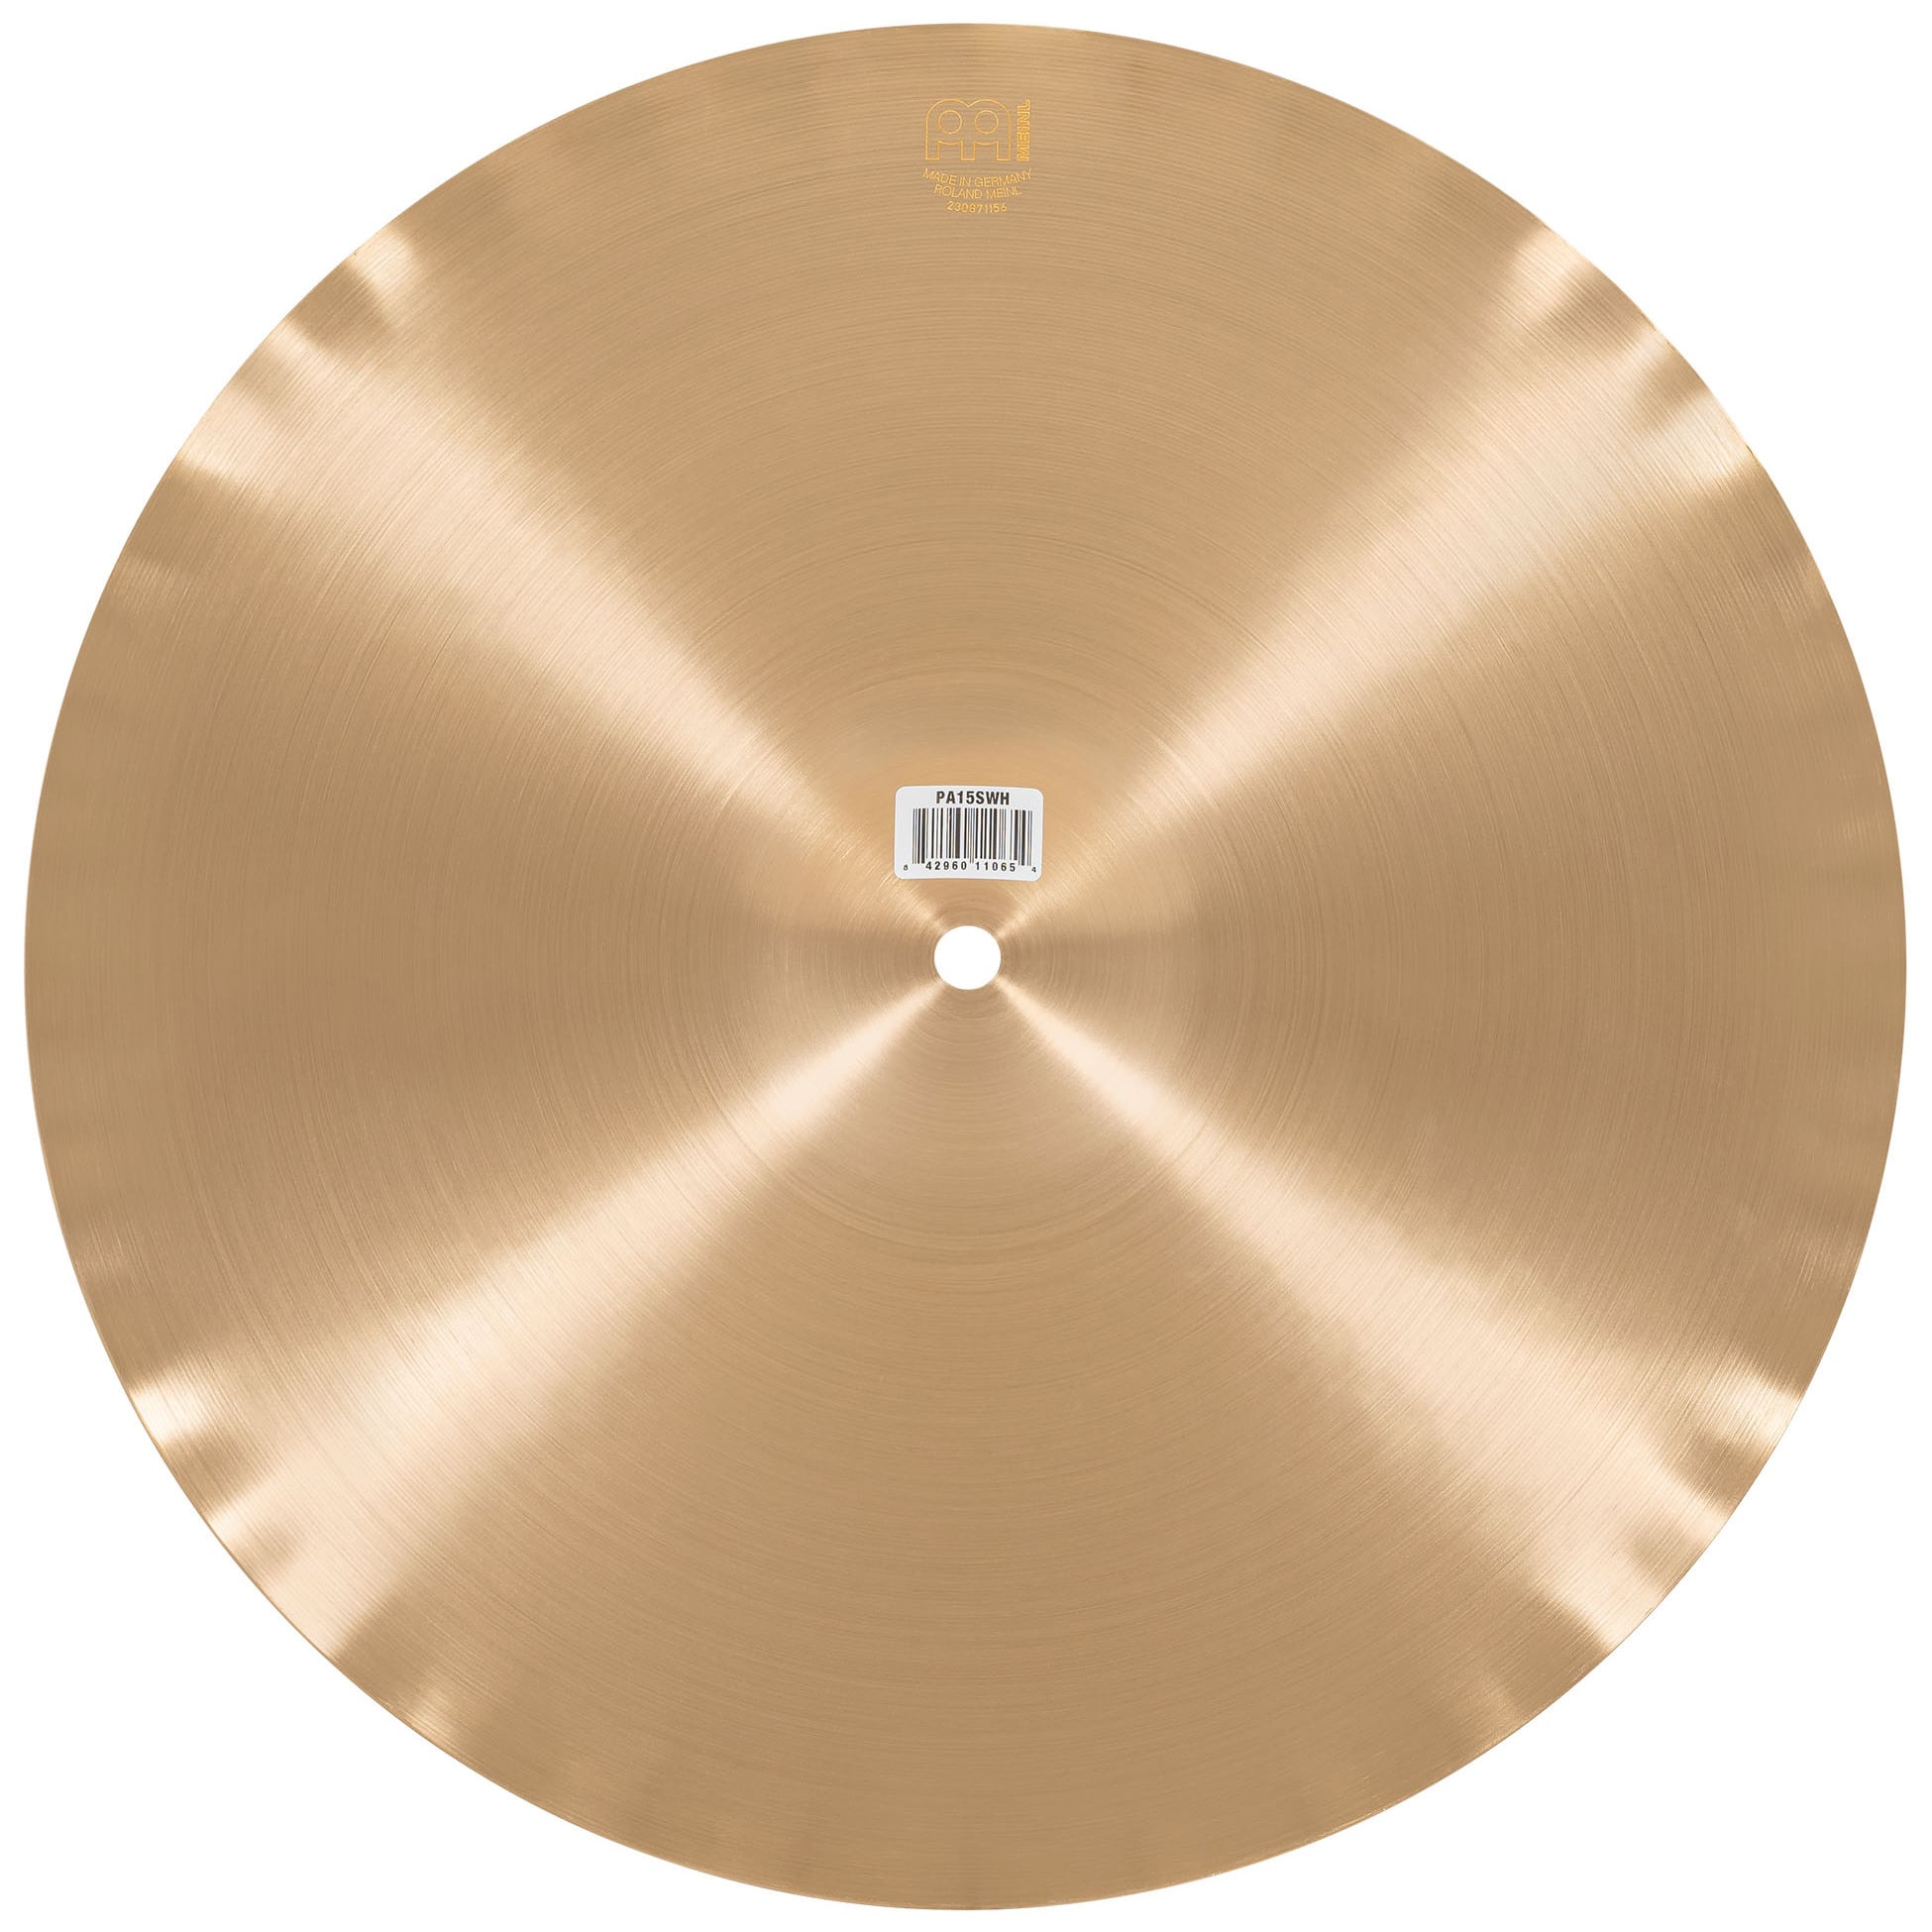 Meinl Cymbals PA15SWH - 15" Pure Alloy Soundwave Hihat 11